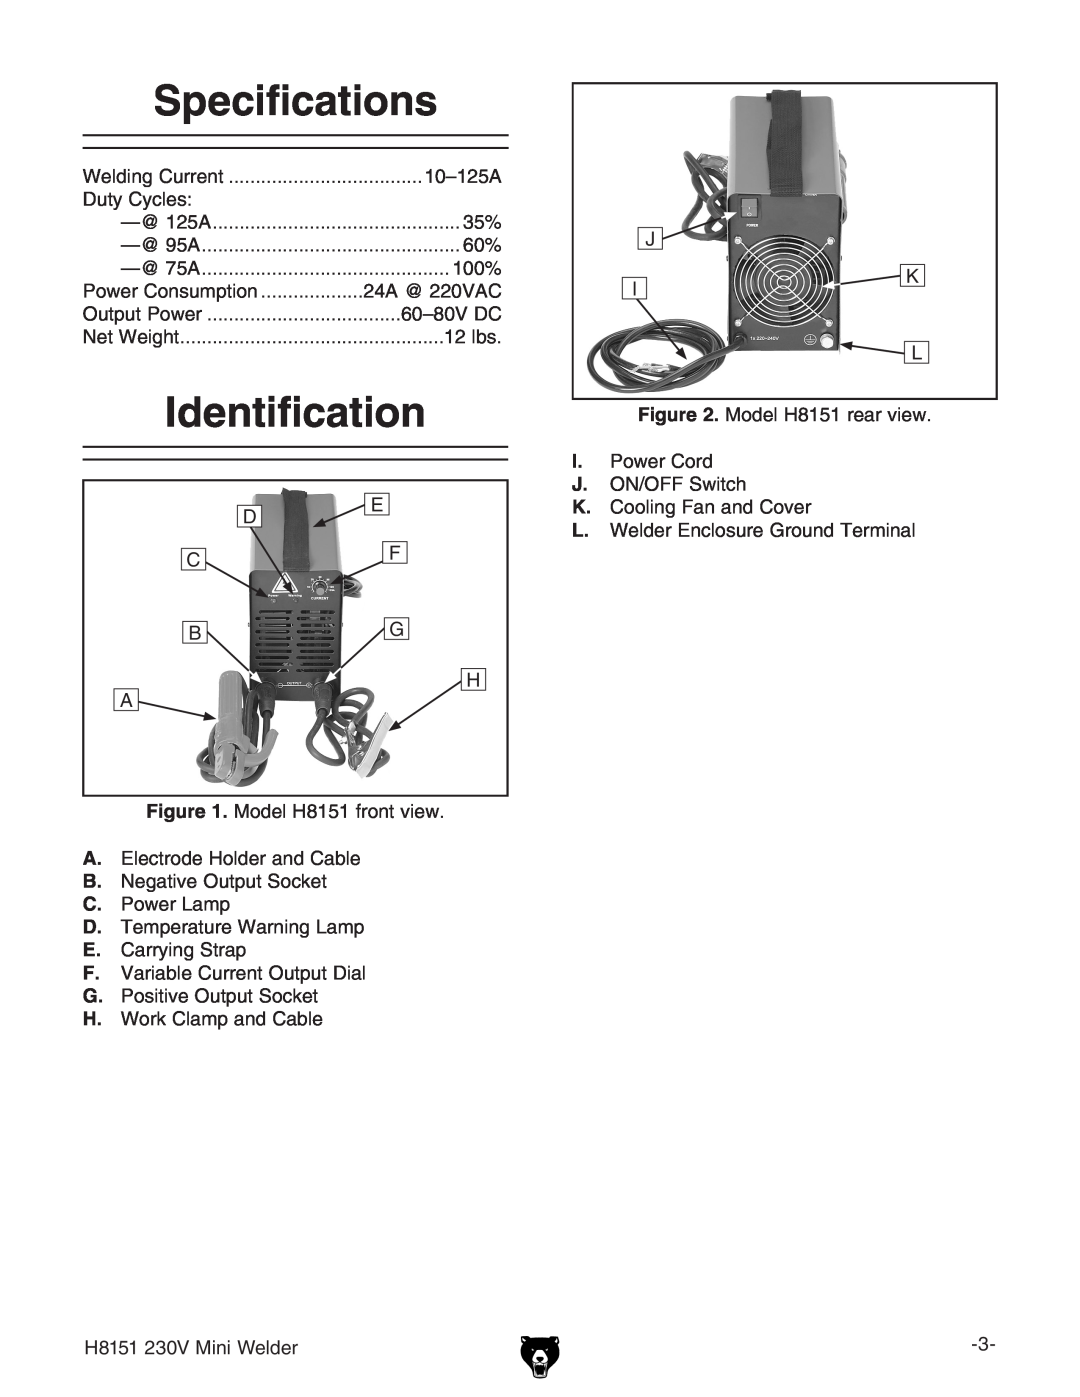 Grizzly 230V, H8151 owner manual Specifications, Identification, Welding Current, Output Power, Net Weight 